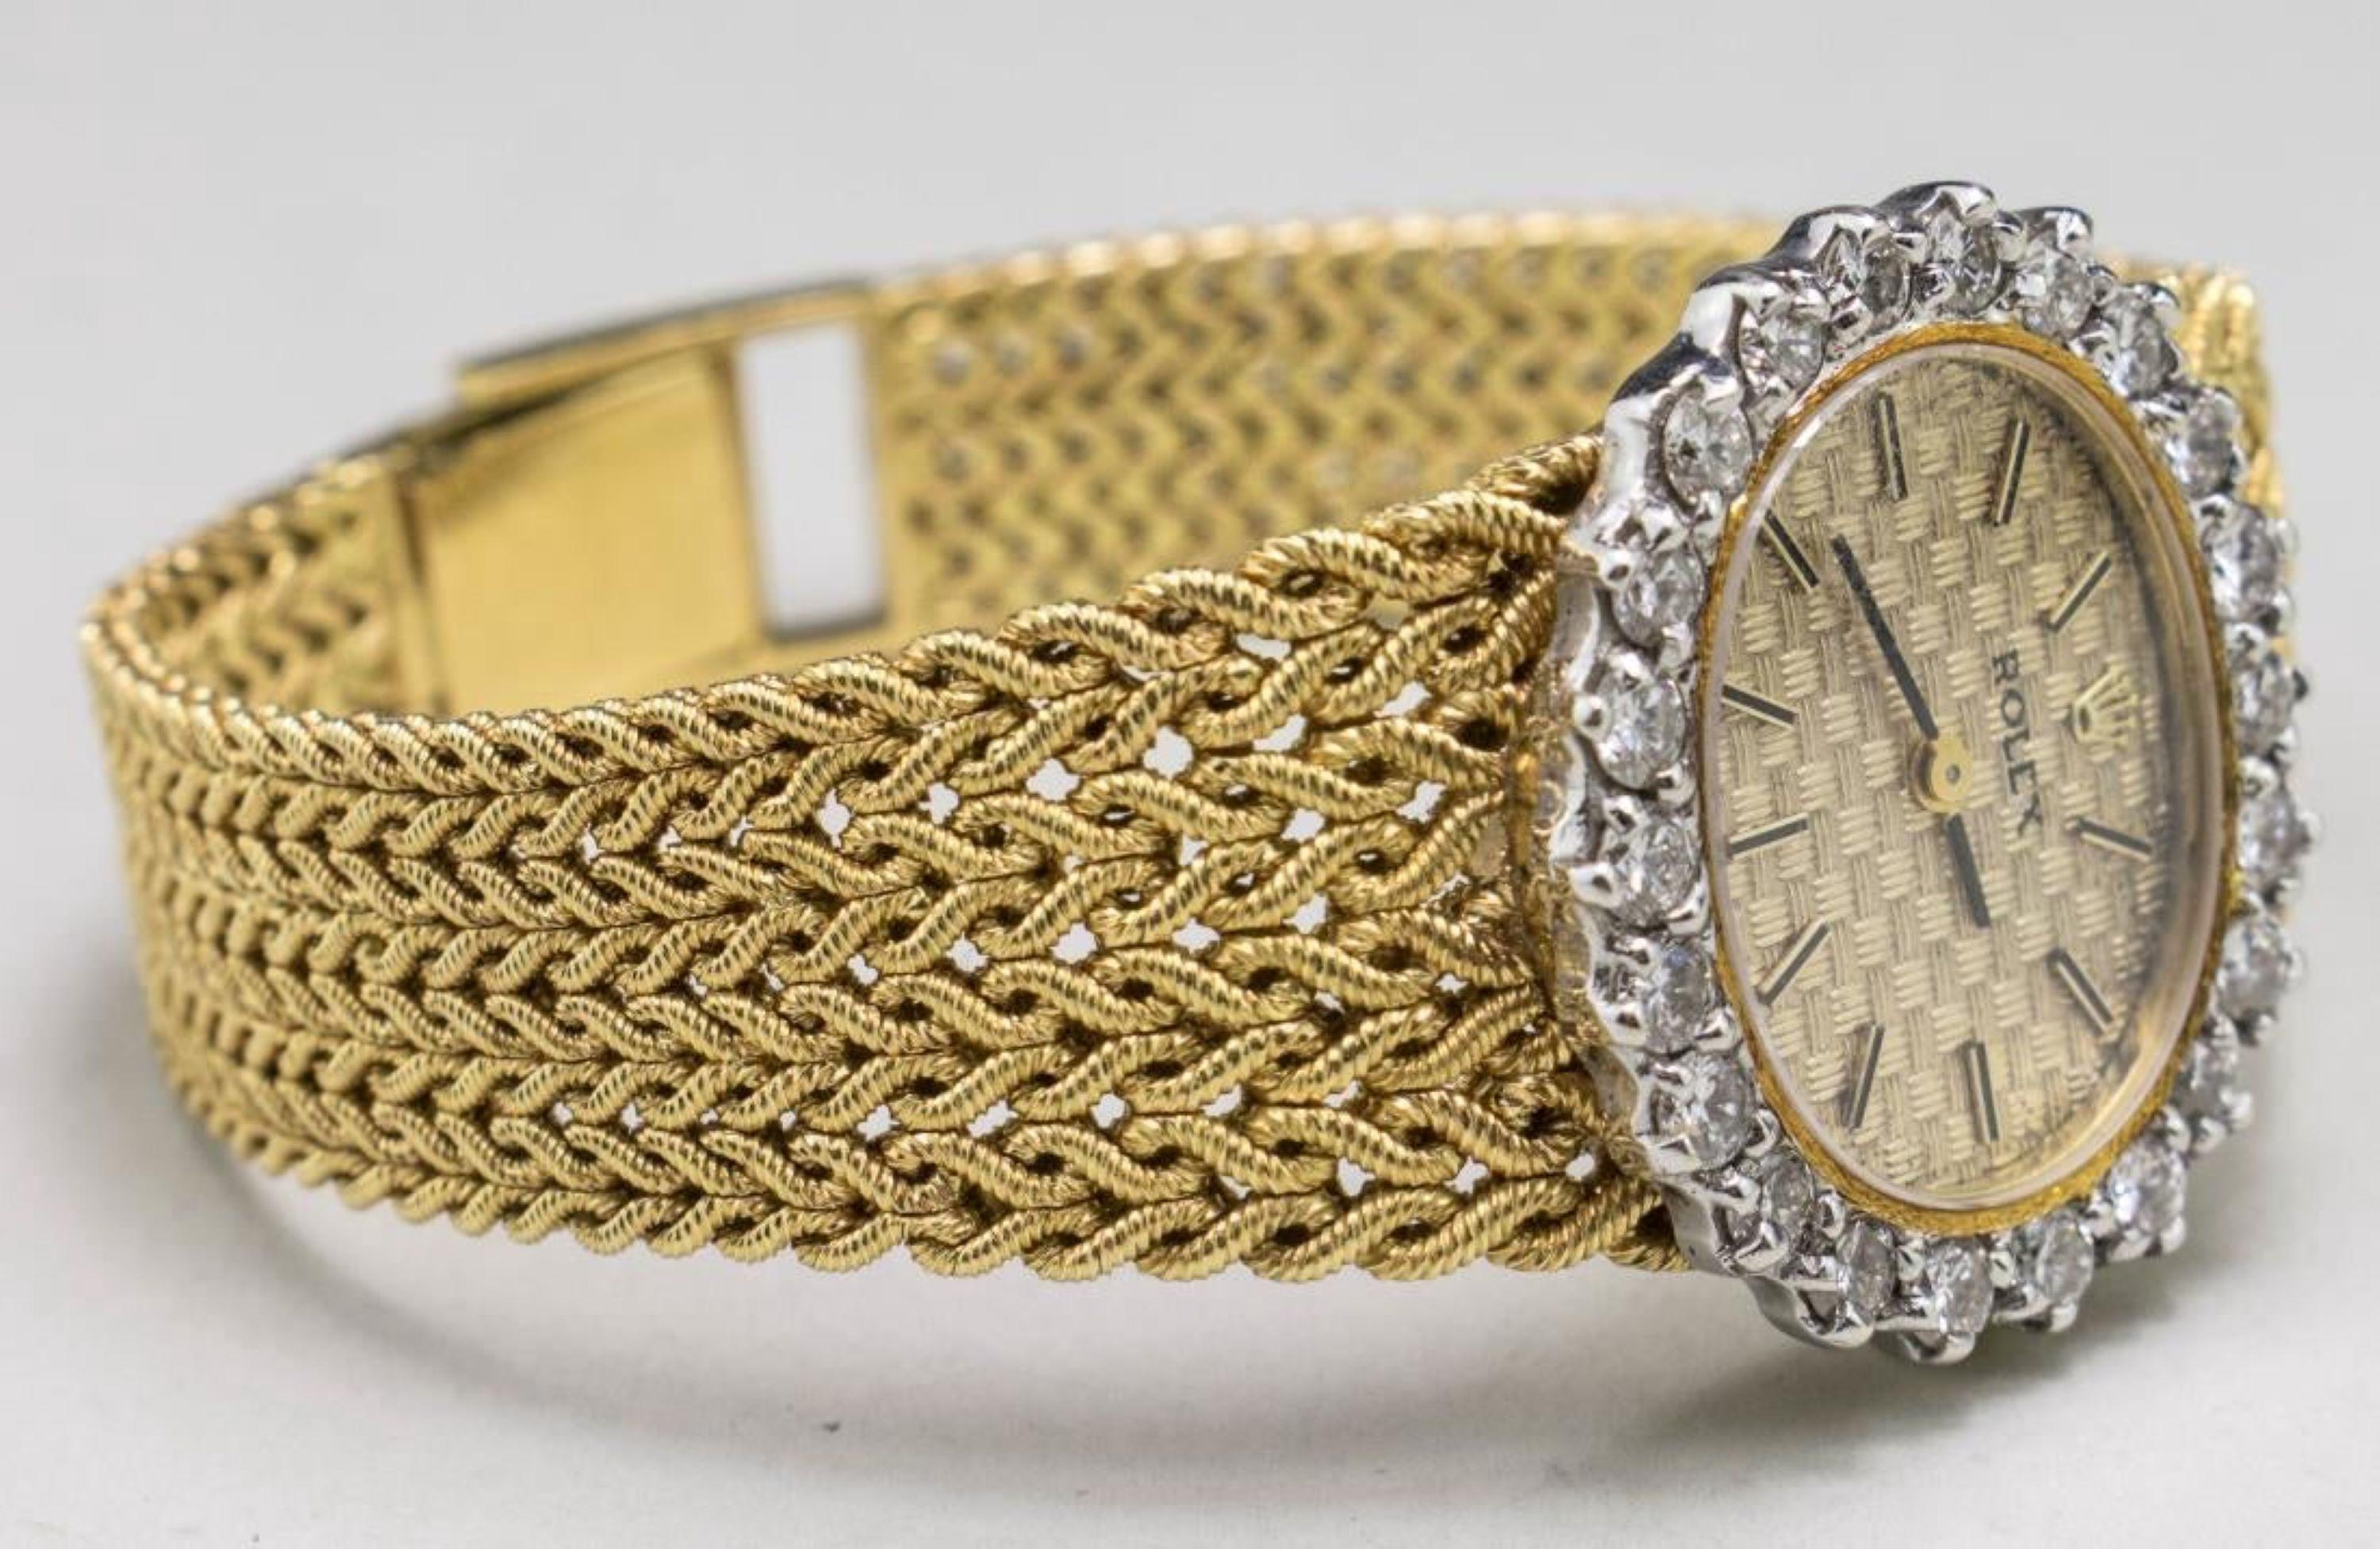 18k yellow gold watch, woven gold watch face with baton hours, signed, diamond bezel and 18k yellow gold bracelet.  Length 7 inches.